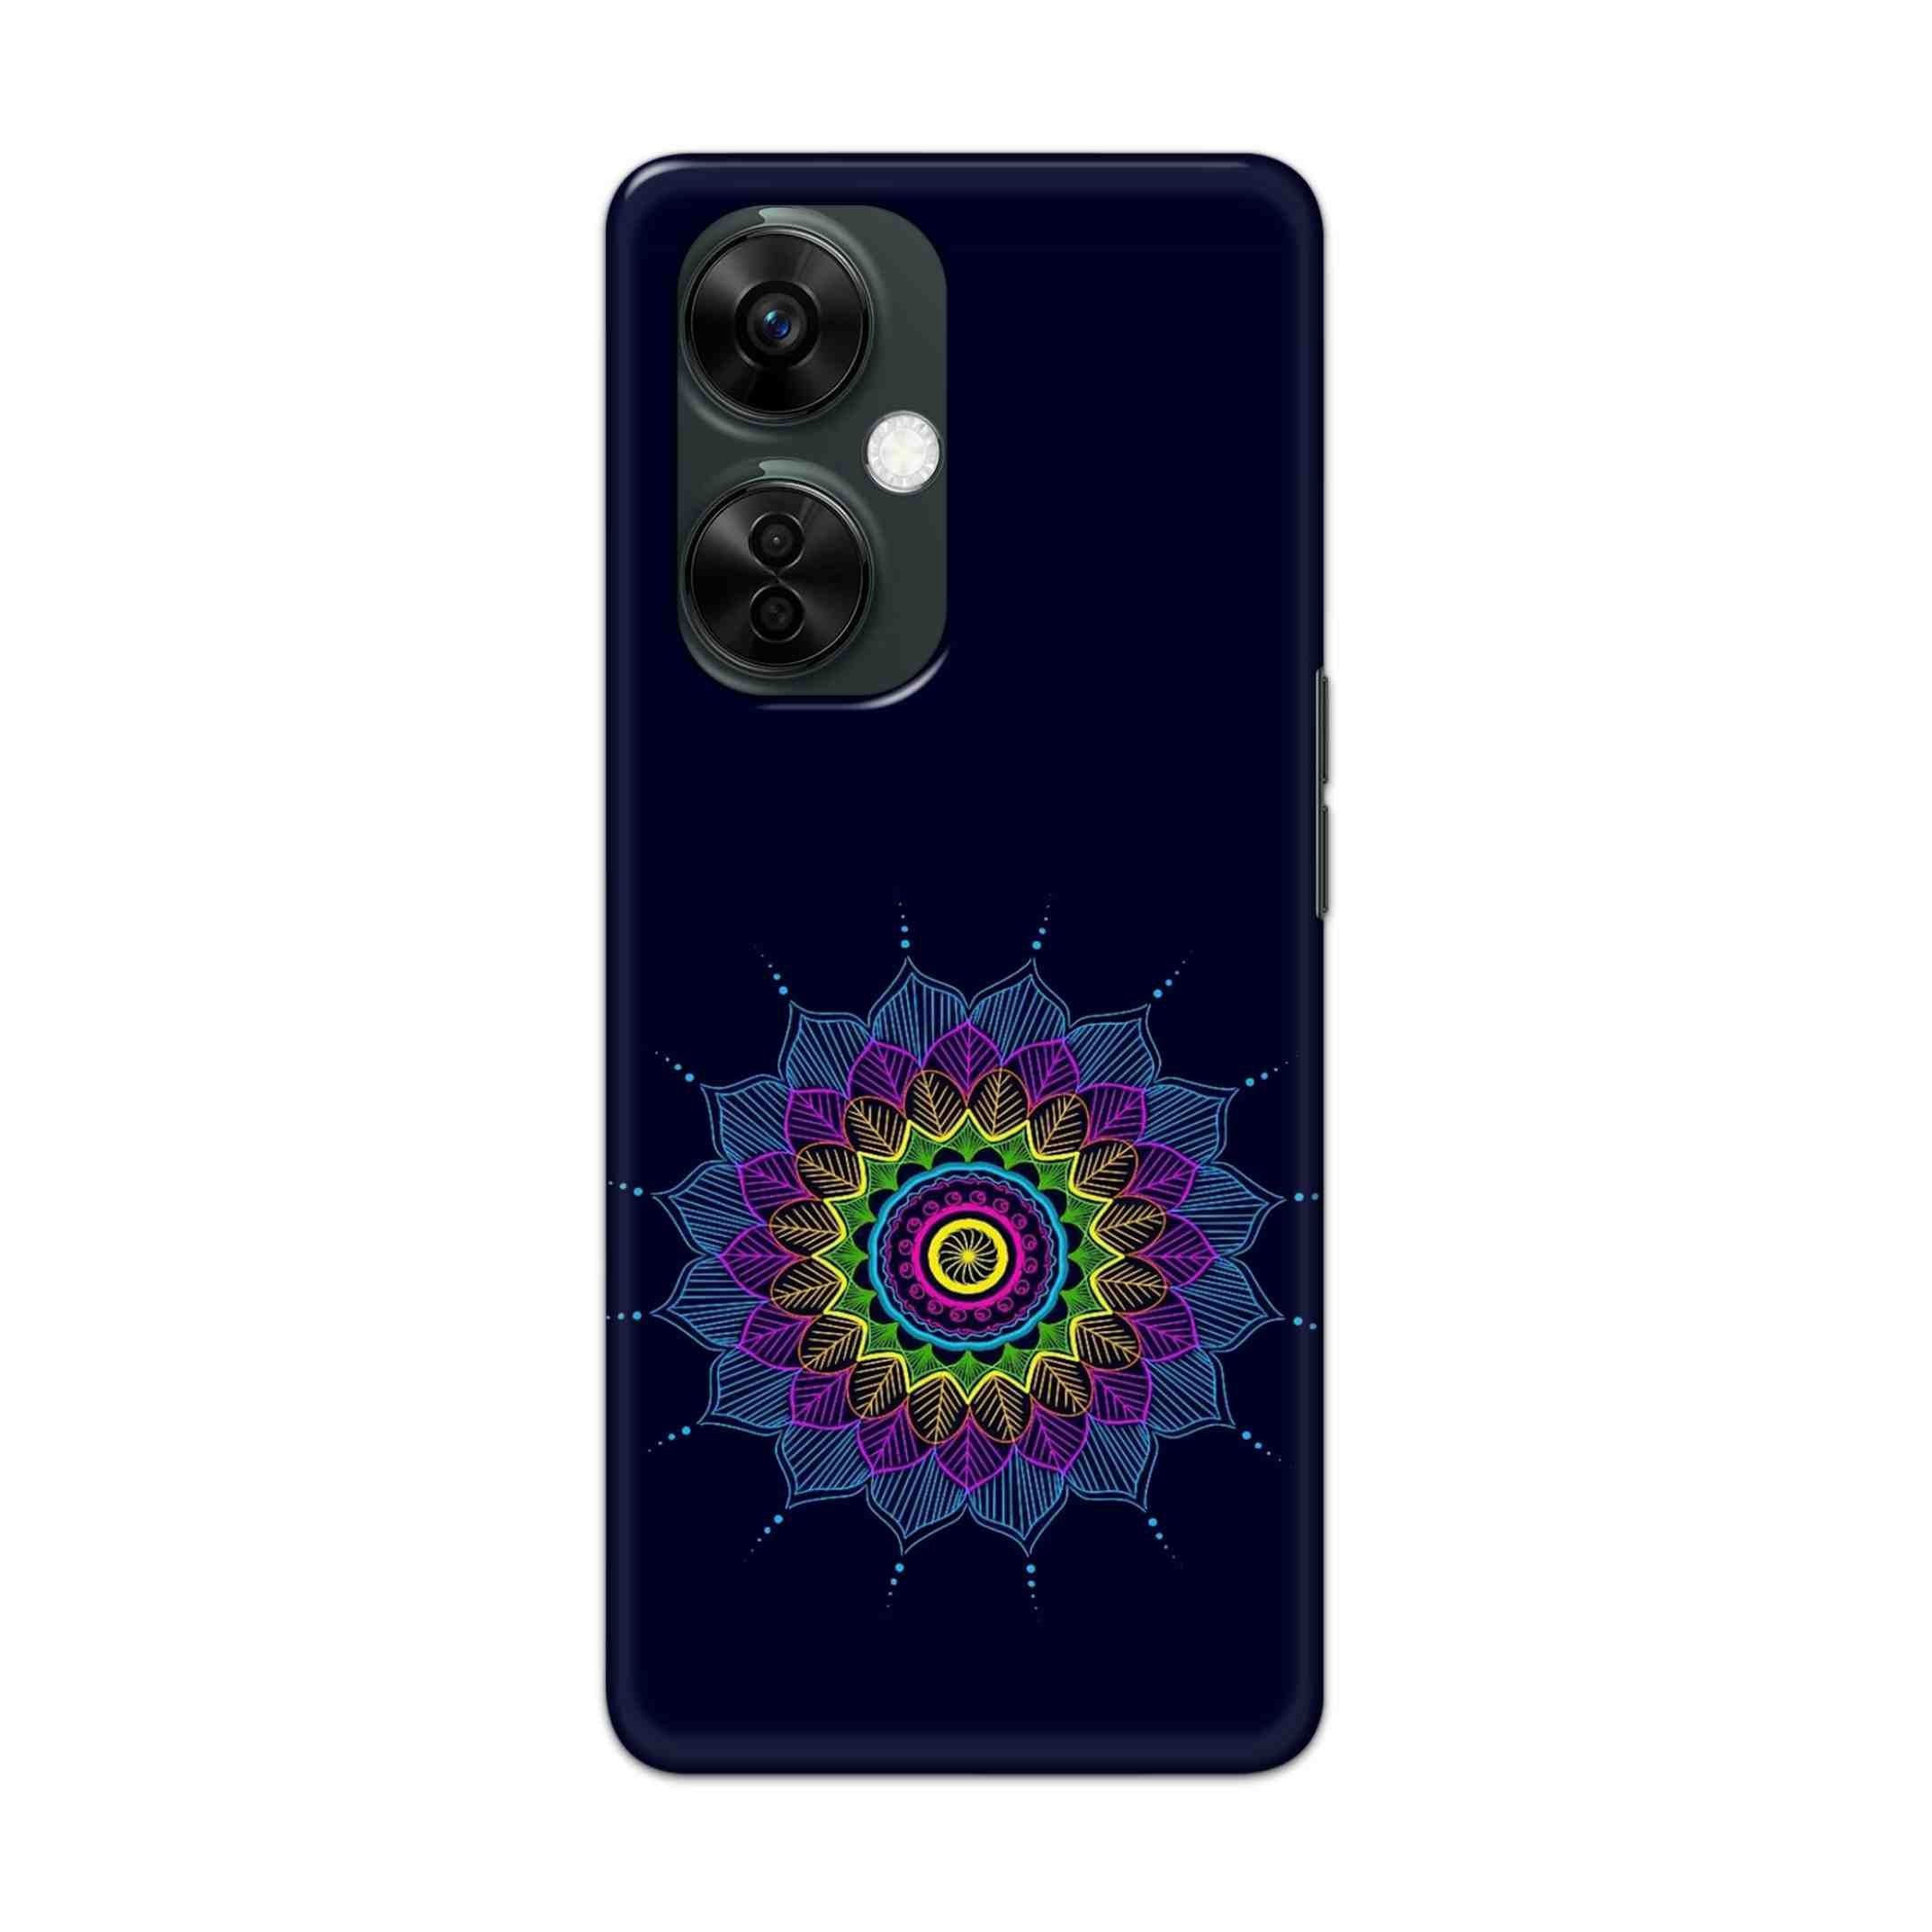 Buy Jung And Mandalas Hard Back Mobile Phone Case Cover For Oneplus Nord CE 3 Lite Online